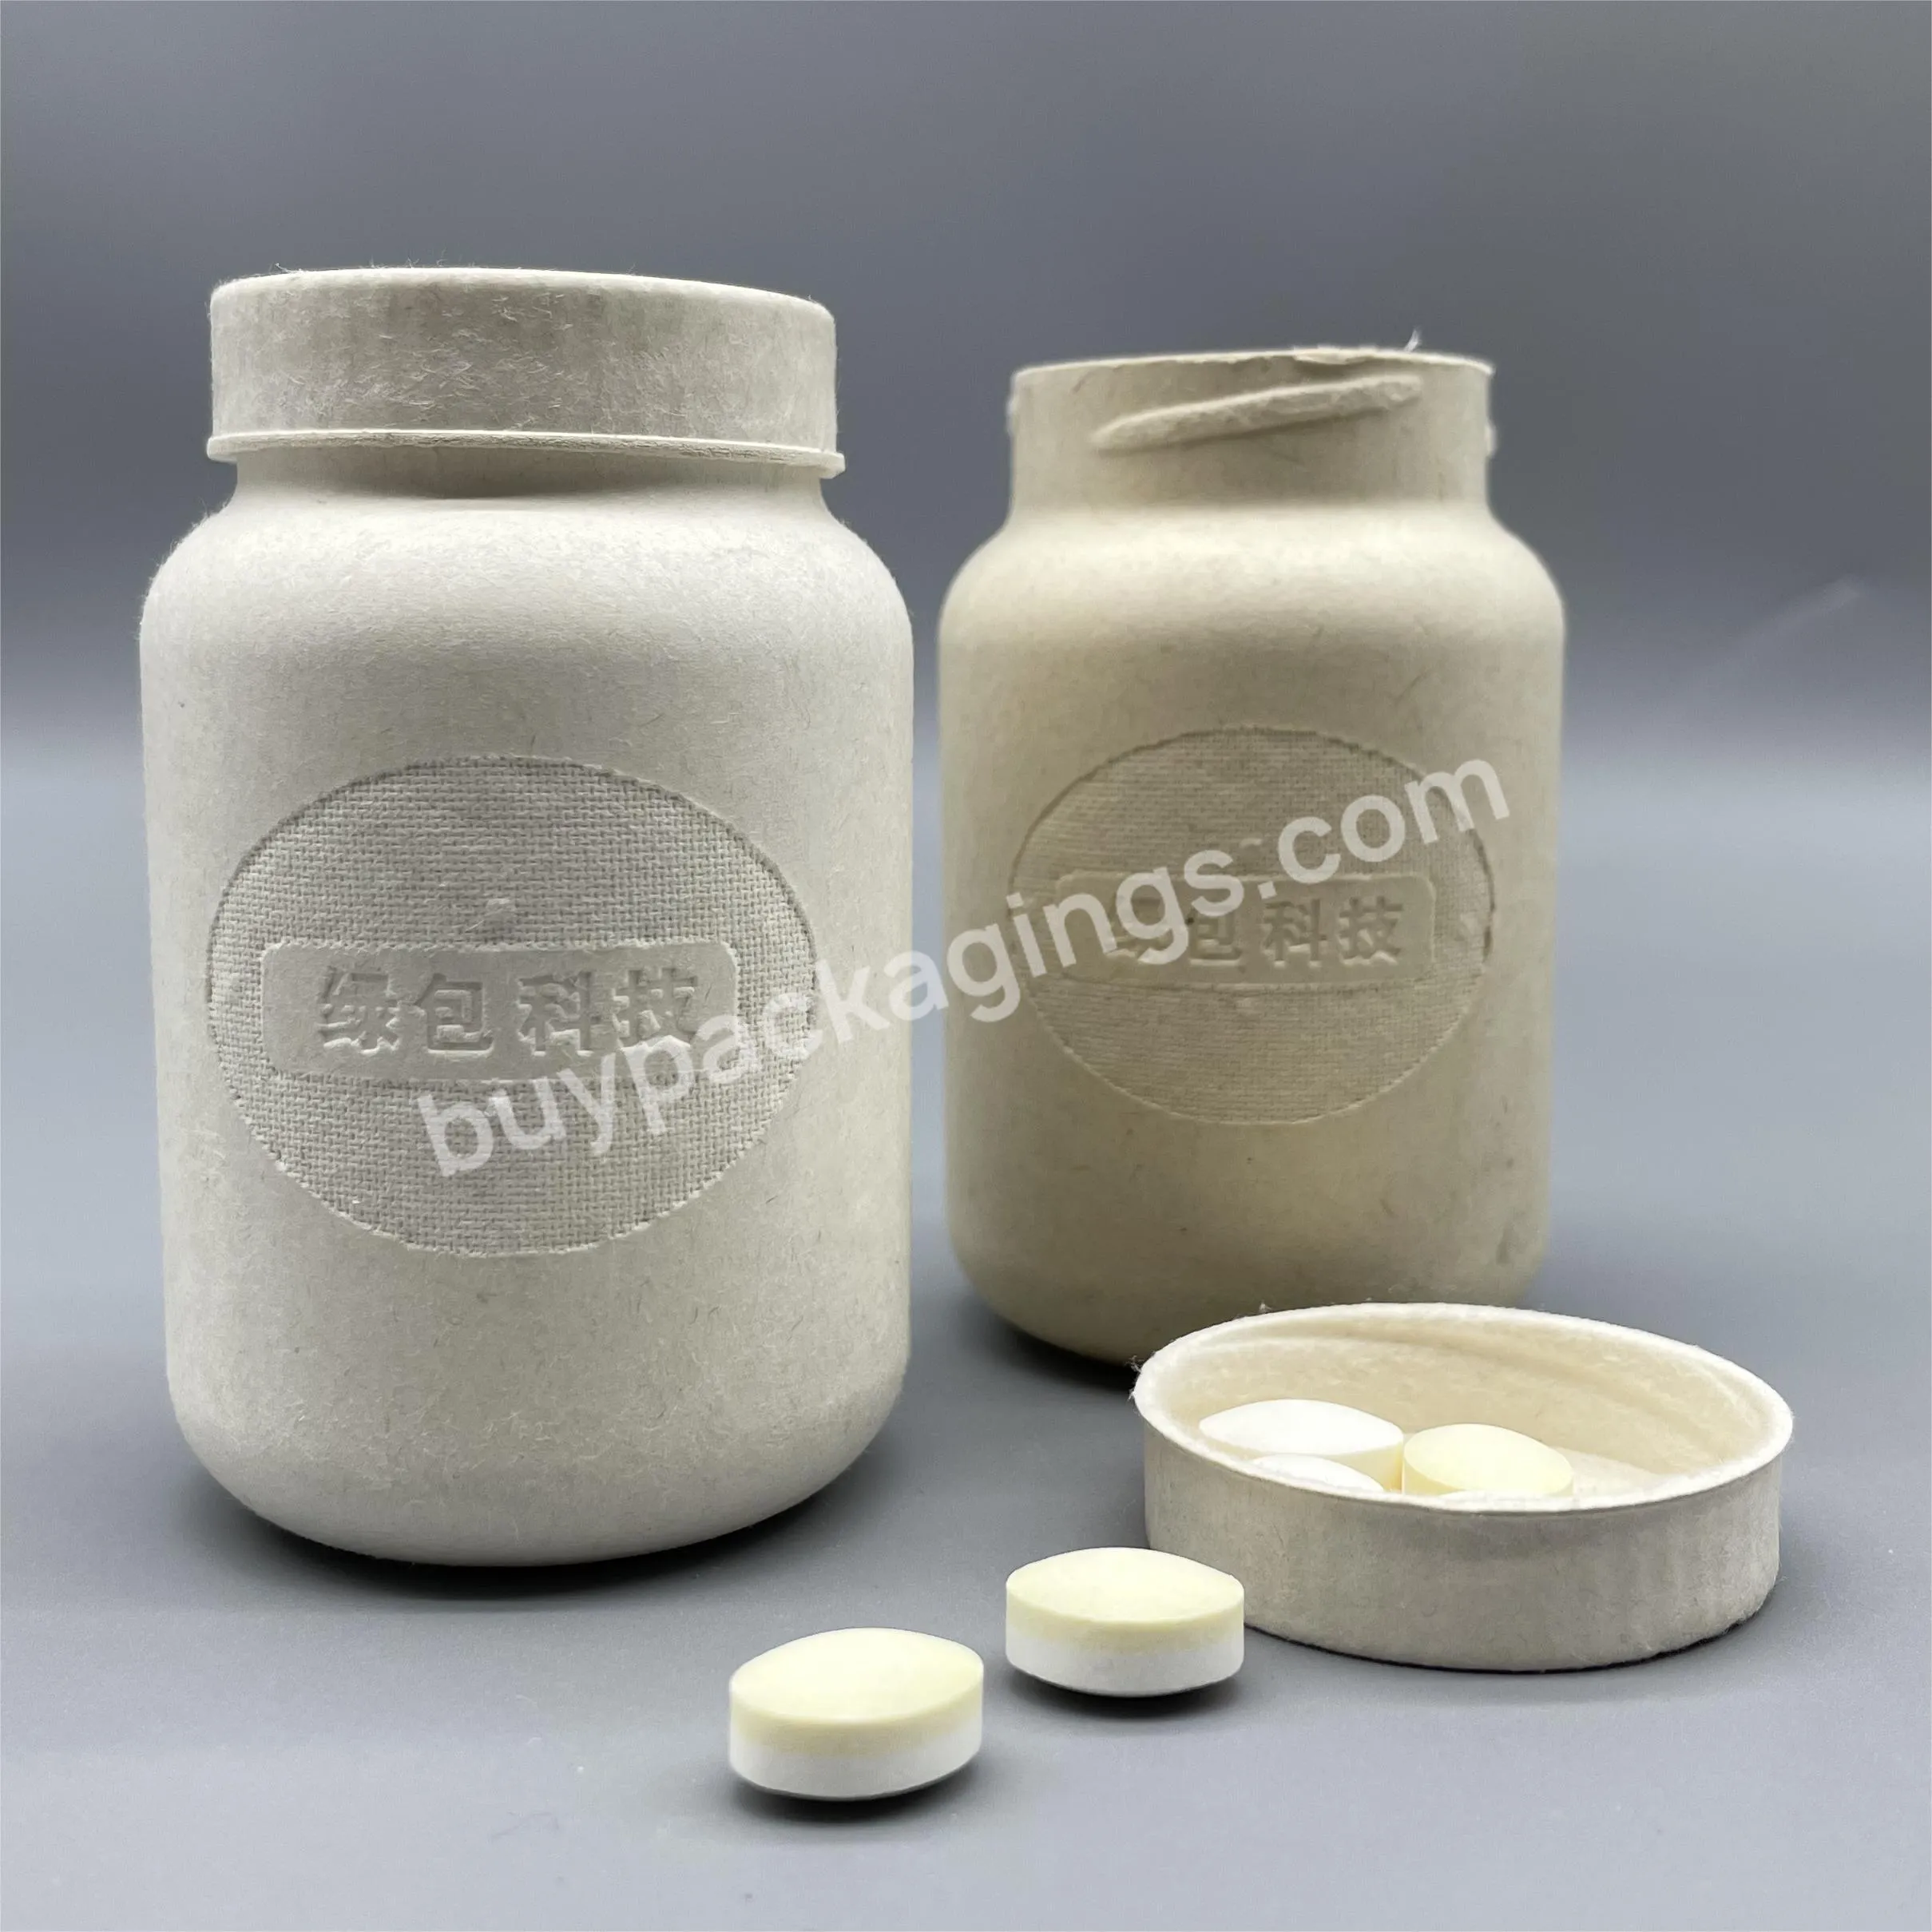 Capsule Wide Mouth Paper Health Care Solid Bottle Medicine Pill And Medicinal Bottle Cover Screw Cap